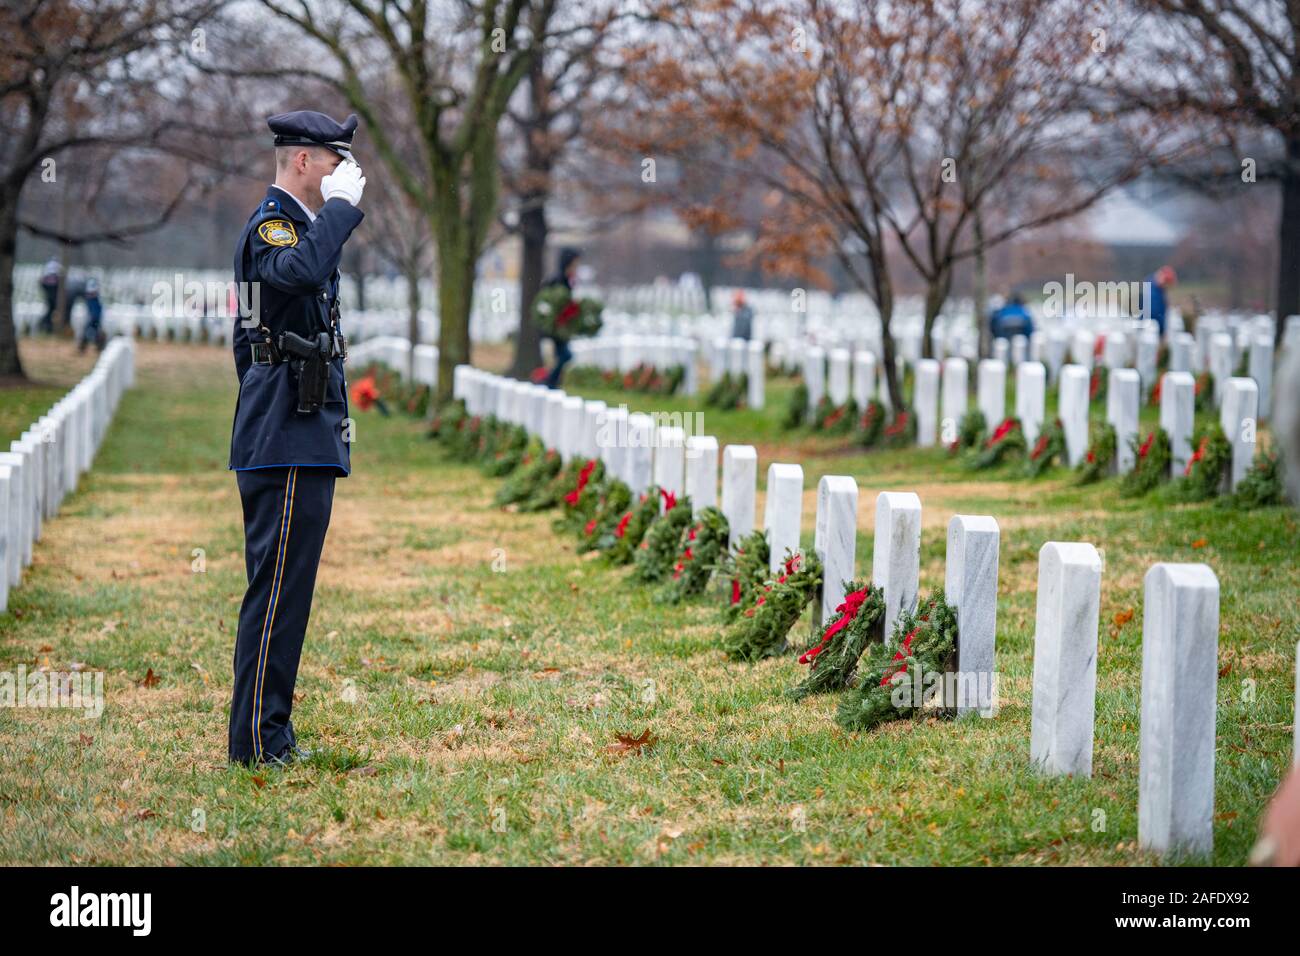 Arlington, United States of America. 14 December, 2019. A State Police volunteer salutes after placing a wreath on gravesites of fallen service members during the 28th Wreaths Across America Day at Arlington National Cemetery December 14, 2019 in Arlington, Virginia. More than 38,000 volunteers place wreaths at every gravesite at Arlington National Cemetery and other sites around the nation.  Credit: Elizabeth Fraser/DOD/Alamy Live News Stock Photo